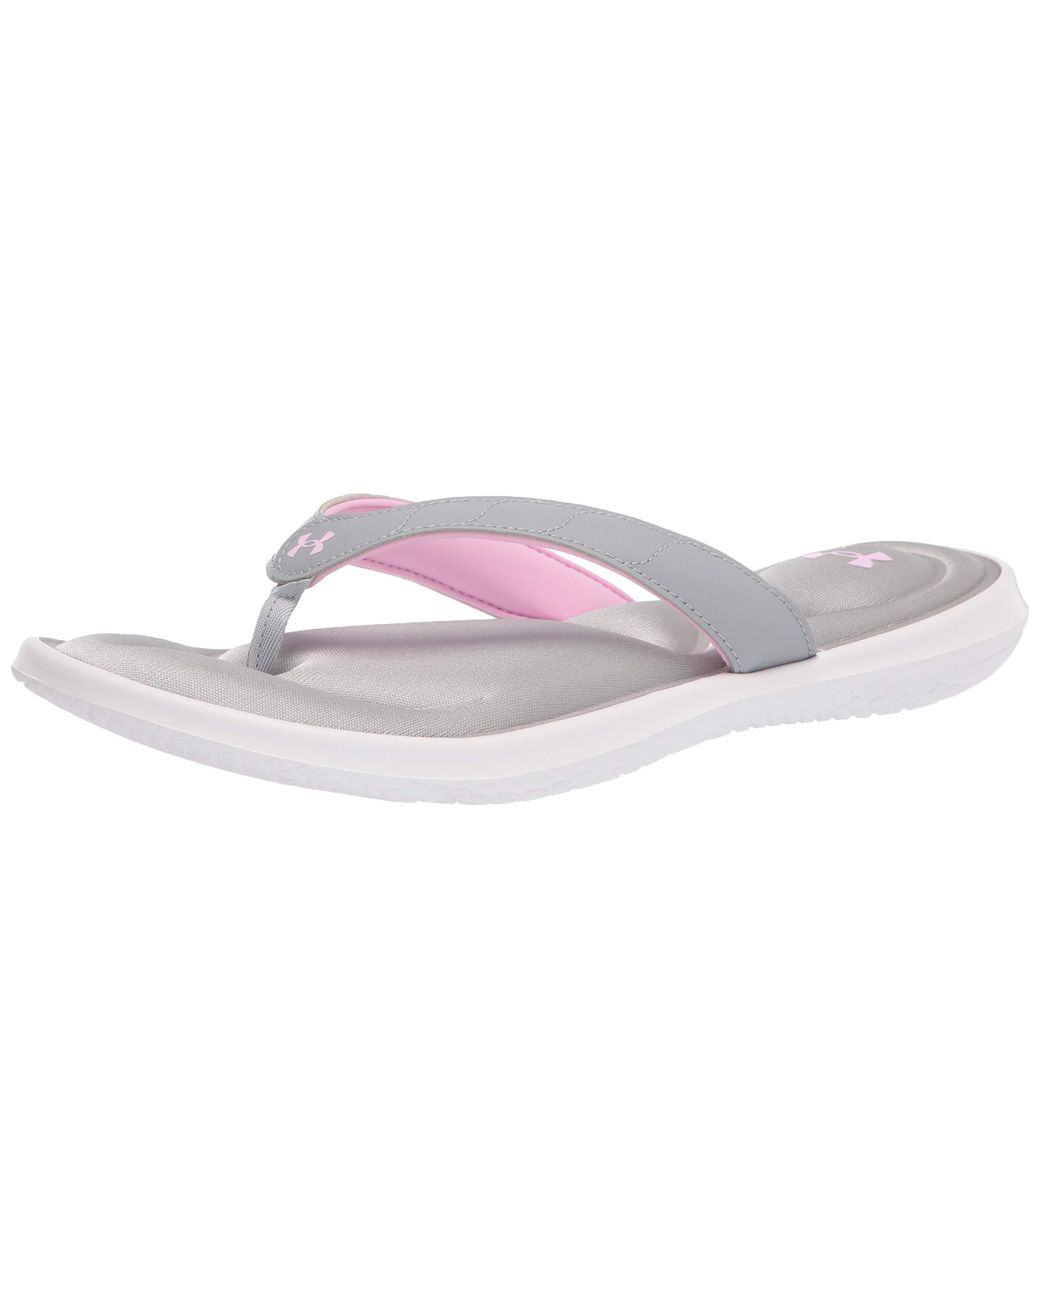 Under Armour Synthetic Marbella Vii T Flip-flop in White - Lyst